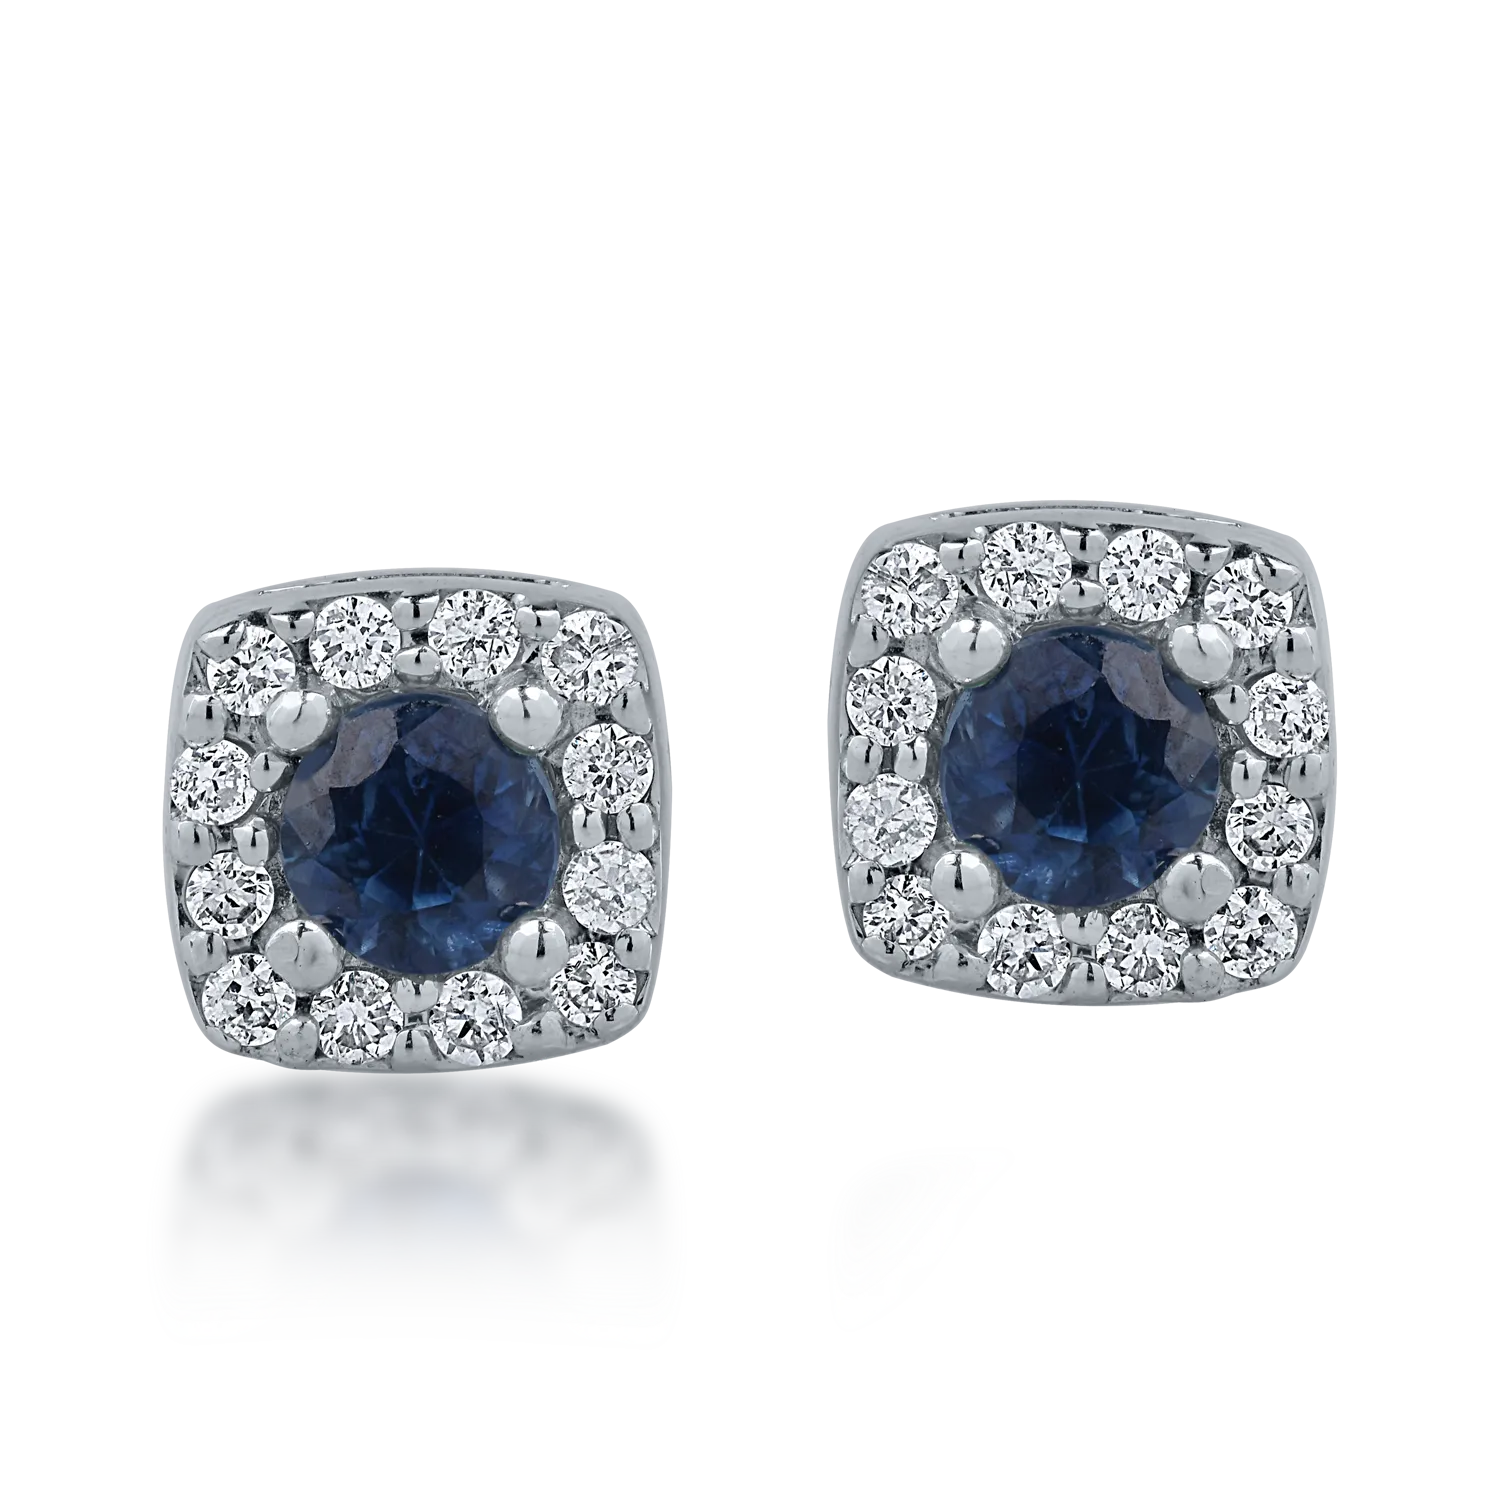 White gold earrings with 0.32ct sapphires and 0.12ct diamonds